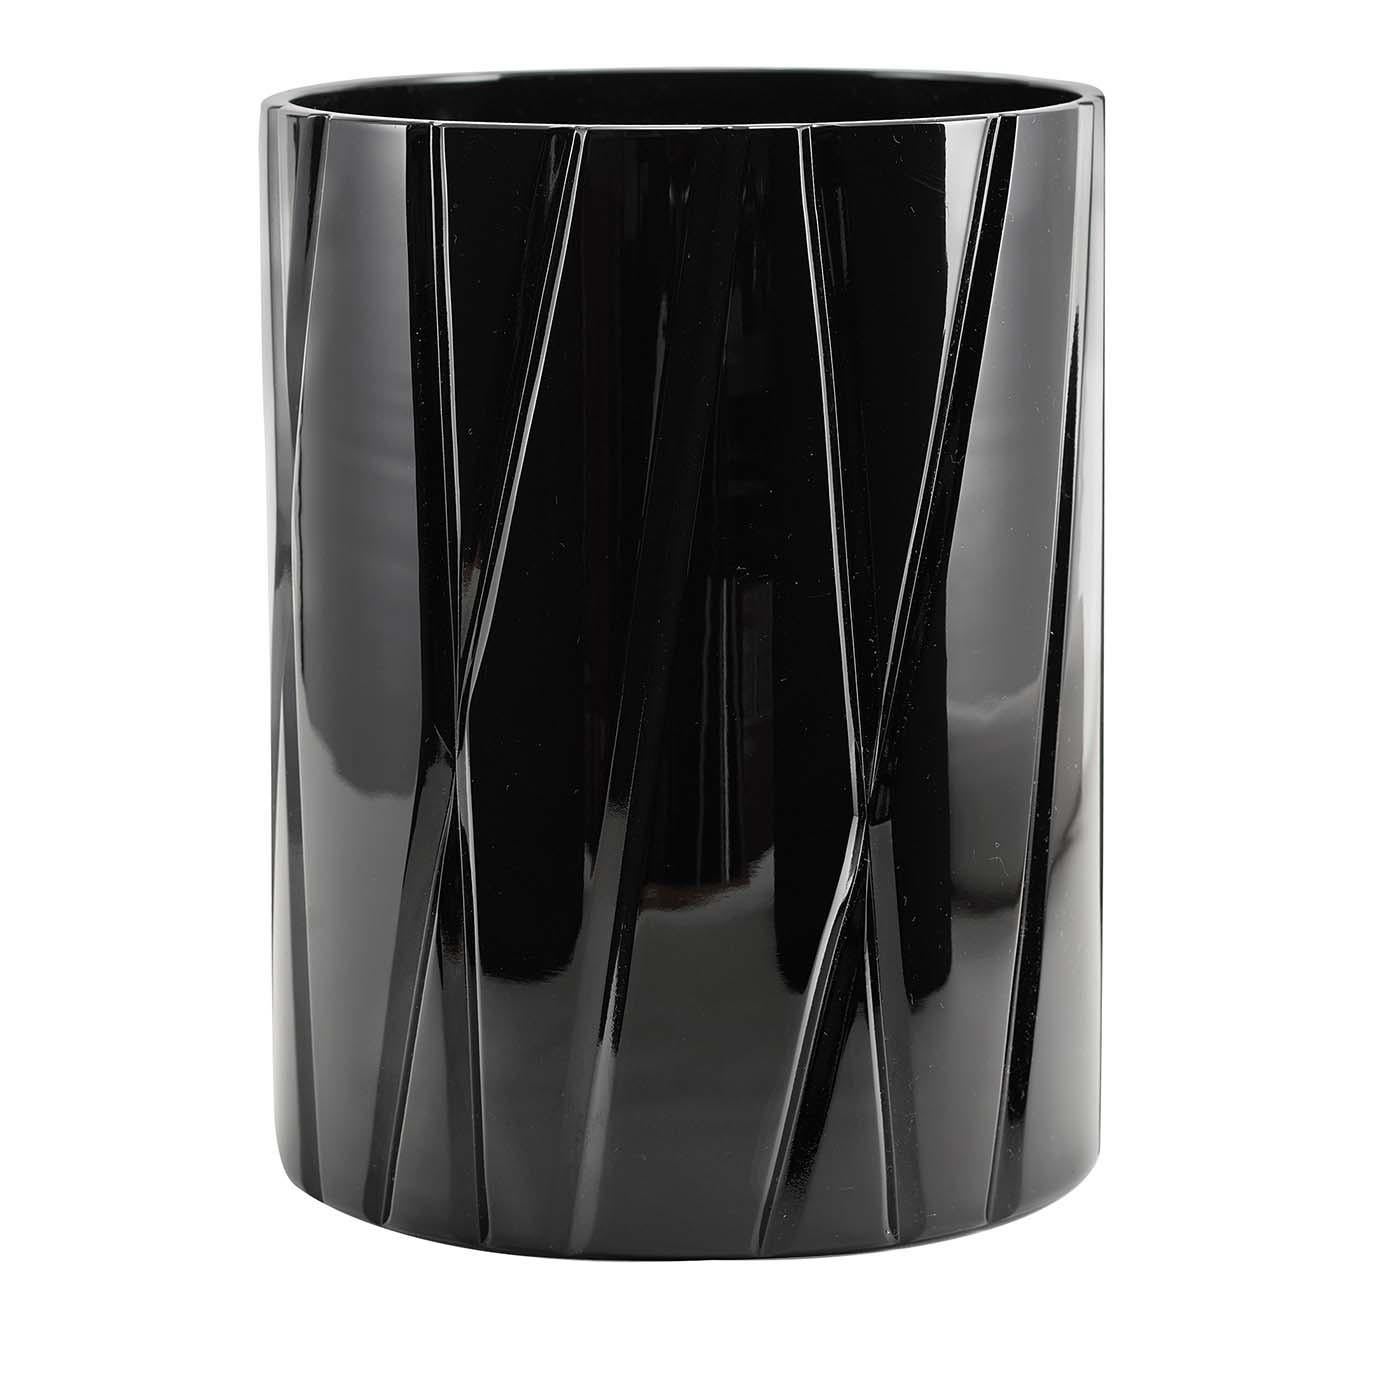 An exercise in elegant minimalism, this black crystal vase is part of the Skyline collection, recreating in a stylized fashion the vertical tension of the modern city's skyscrapers. Either alone, to complement a contemporary interior, or combined